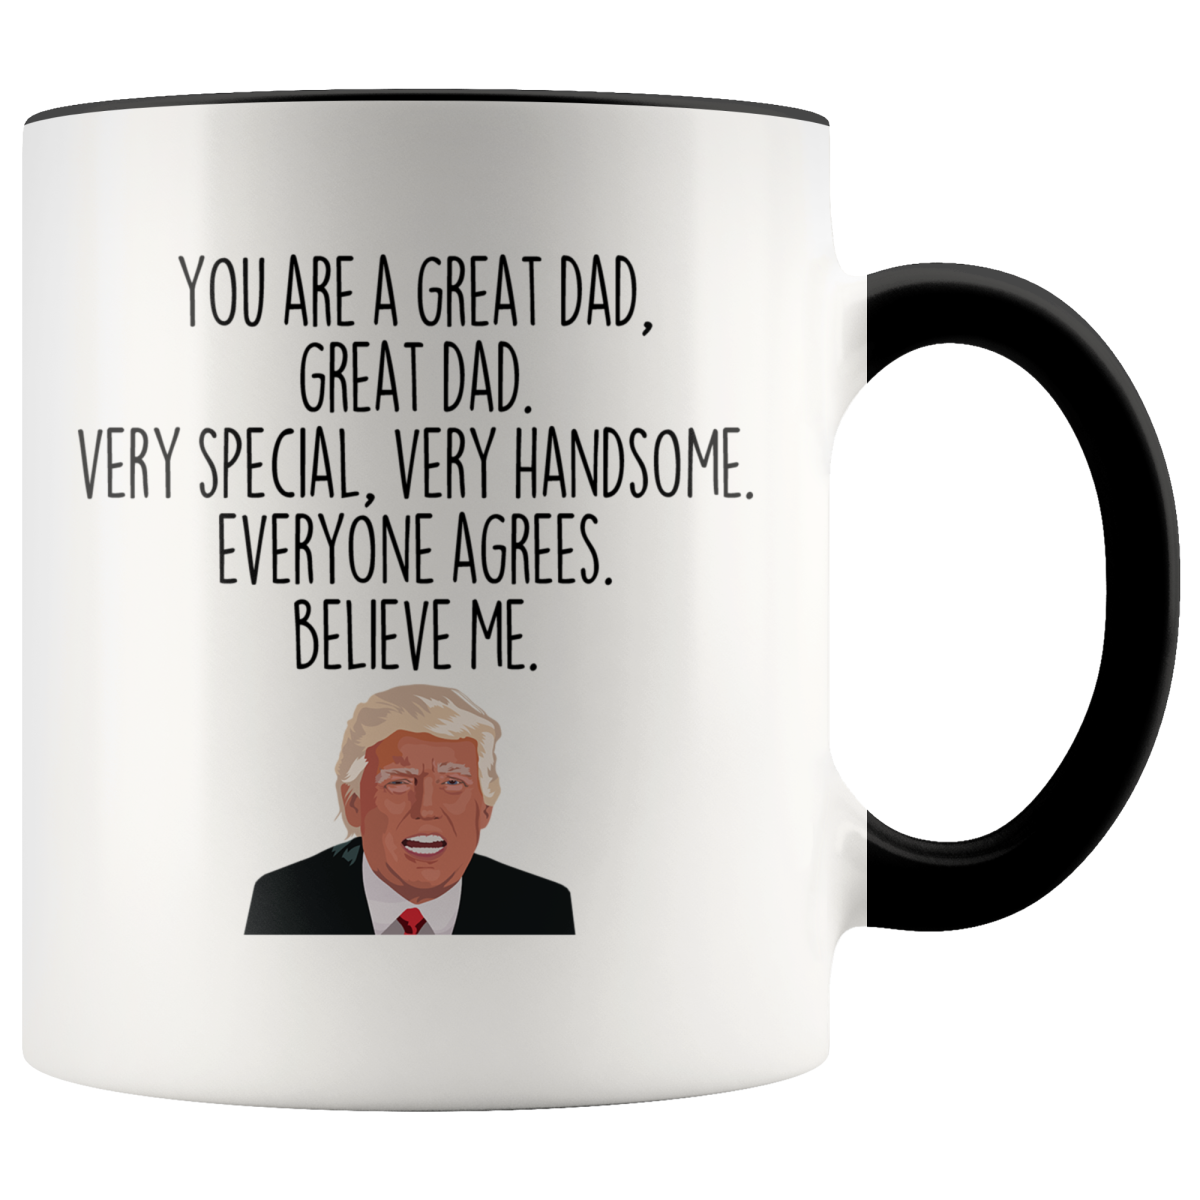 Funny Coffee Mug for Women and Men Funny Gag Gift Idea Birthday Christmas  Fathers Day Gift for Boss Friend Funny Mugs for Mom Funny Tea Cup 